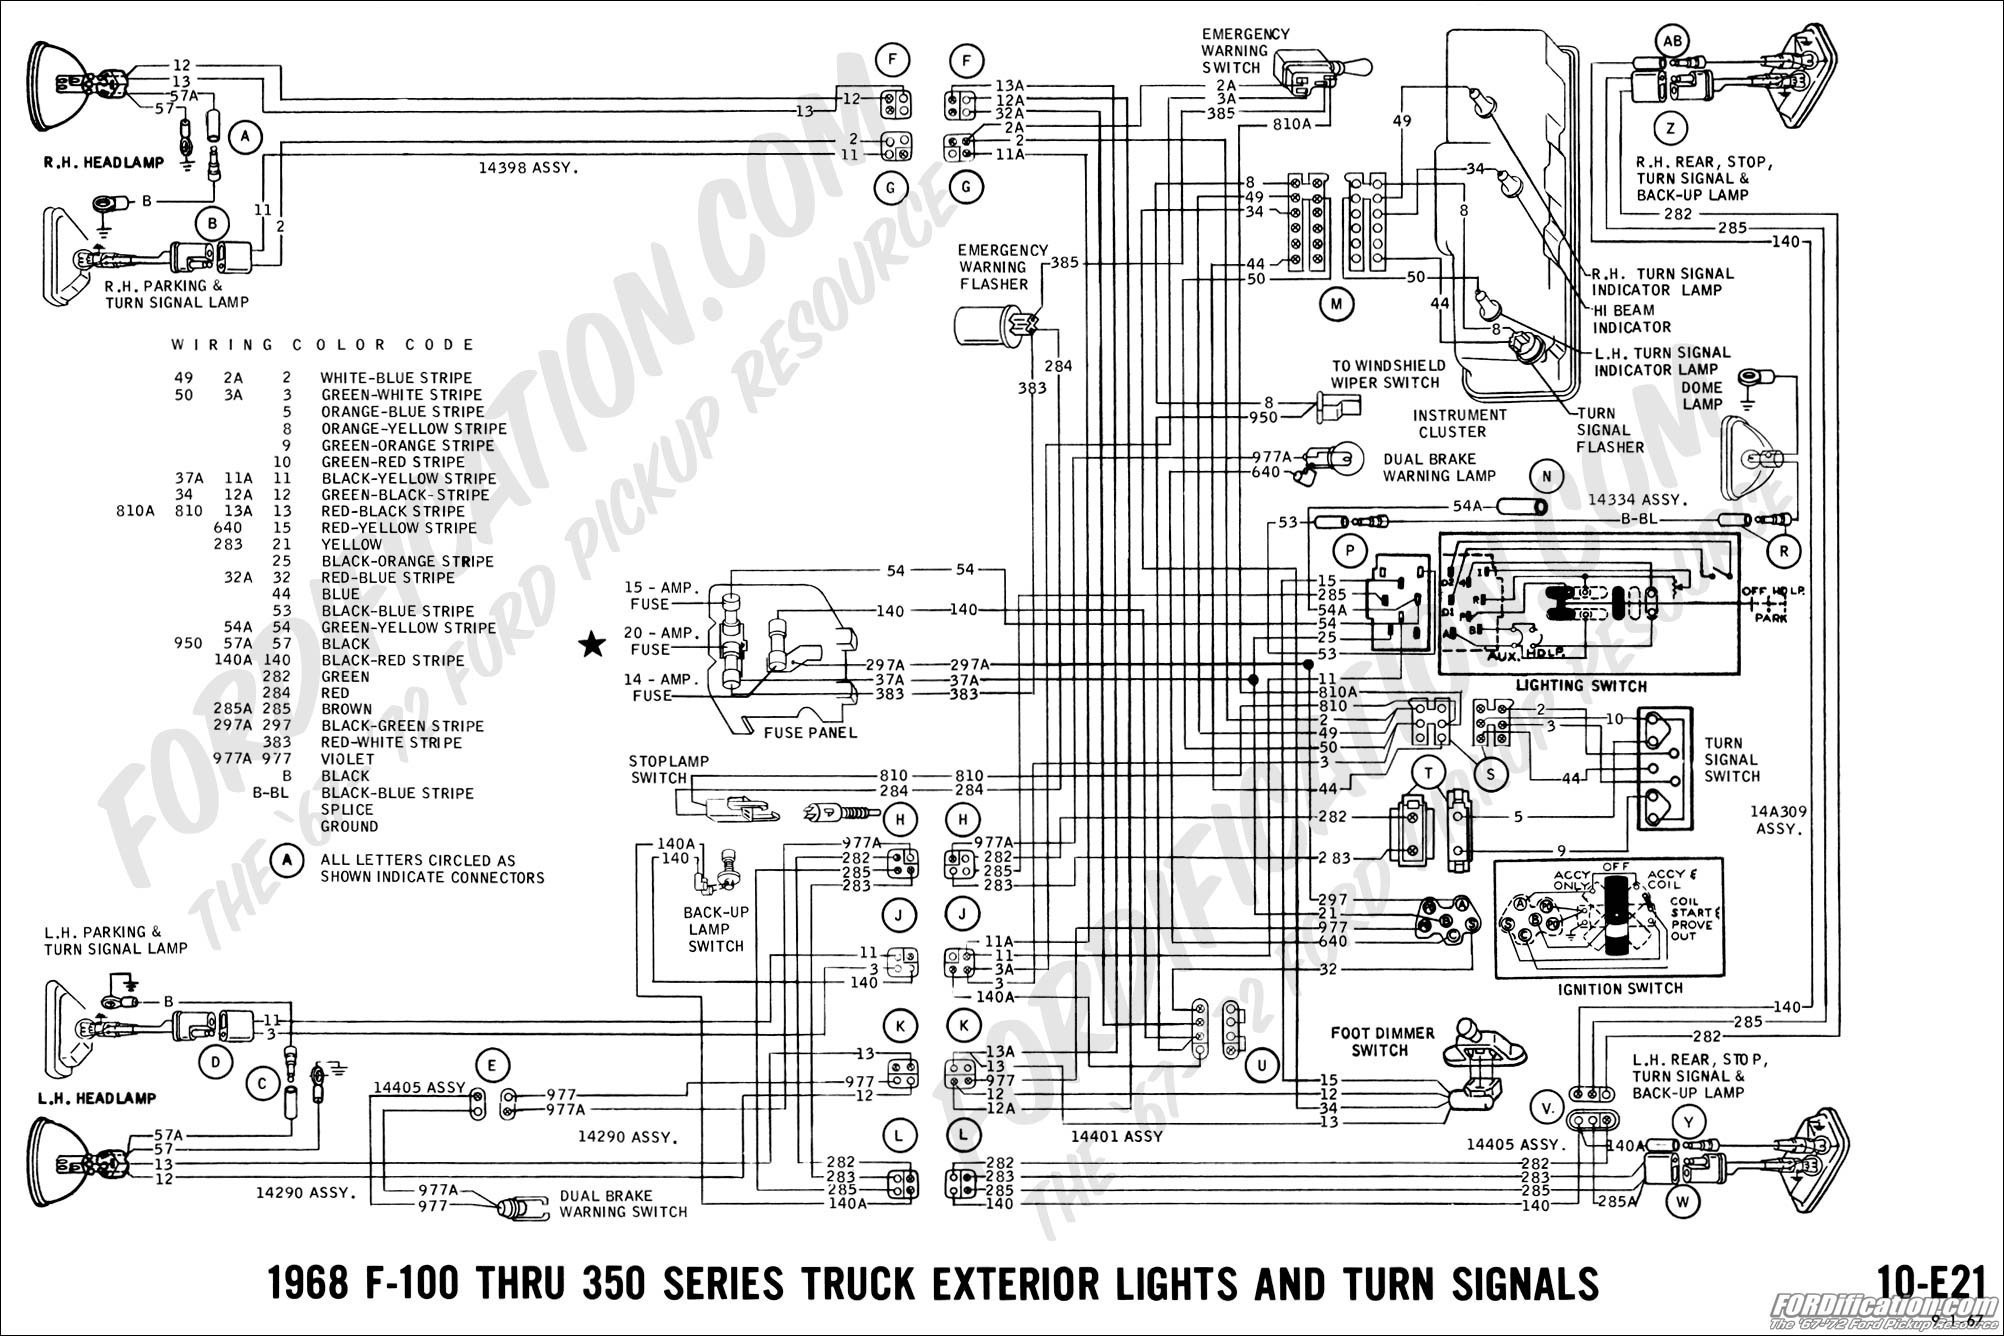 Ford Truck Wiring Diagrams Unique 2003 Ford F150 Wiring Diagram Inspirational Where Could I A Wiring